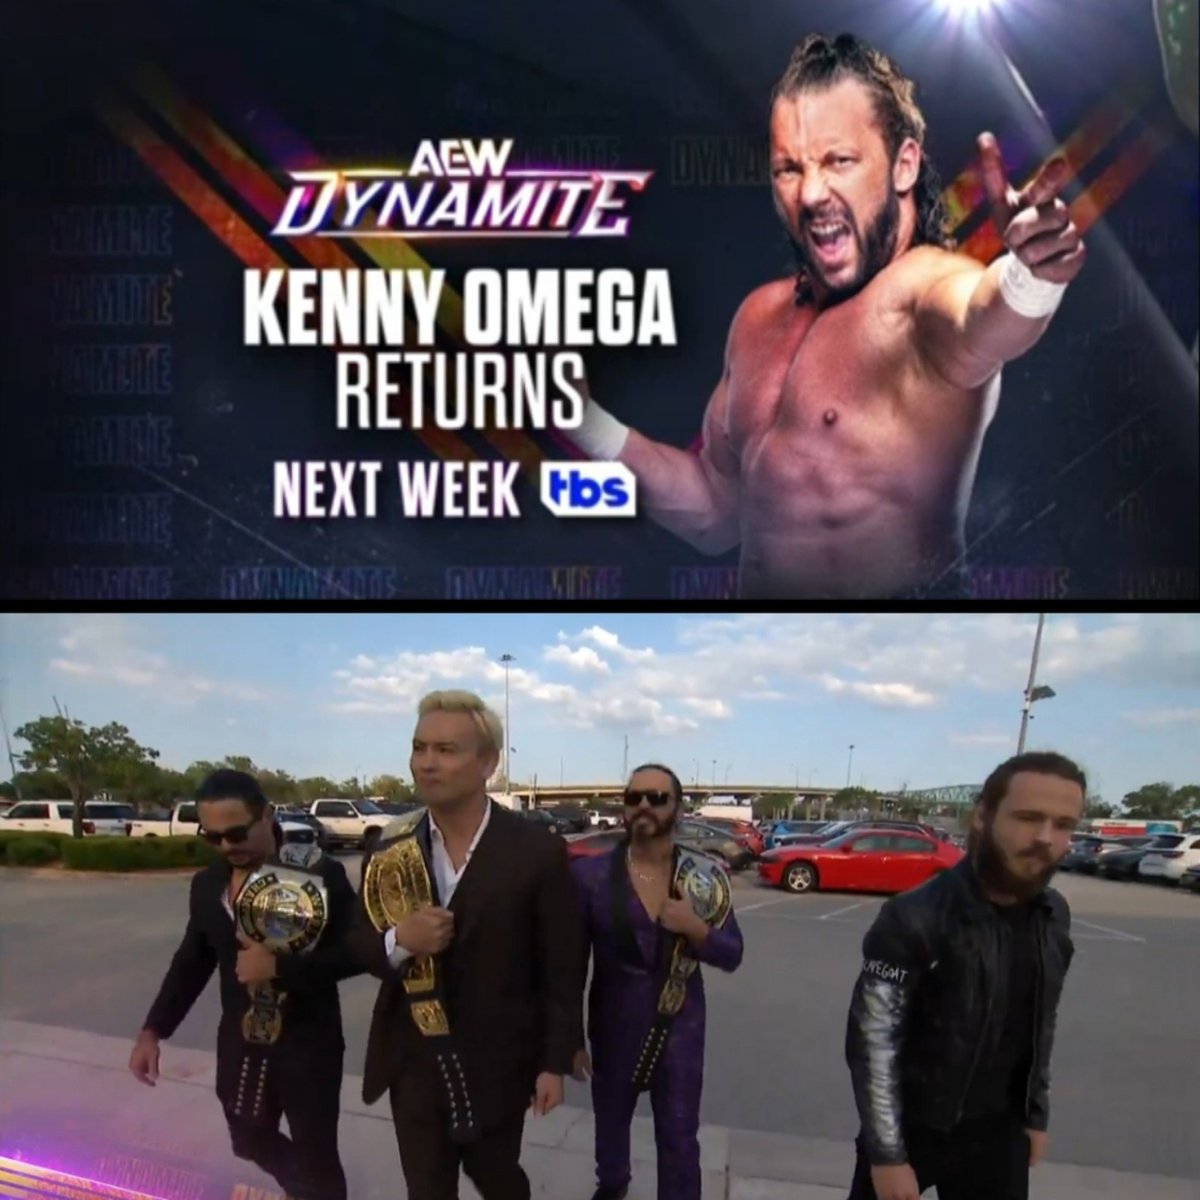 KENNY'S RETURNING NEXT WEEK... Things are about to get REALLY INTERESTING!!!😄❤️ #AEW #AEWDynasty #TheElite #YoungBucks #KennyOmega